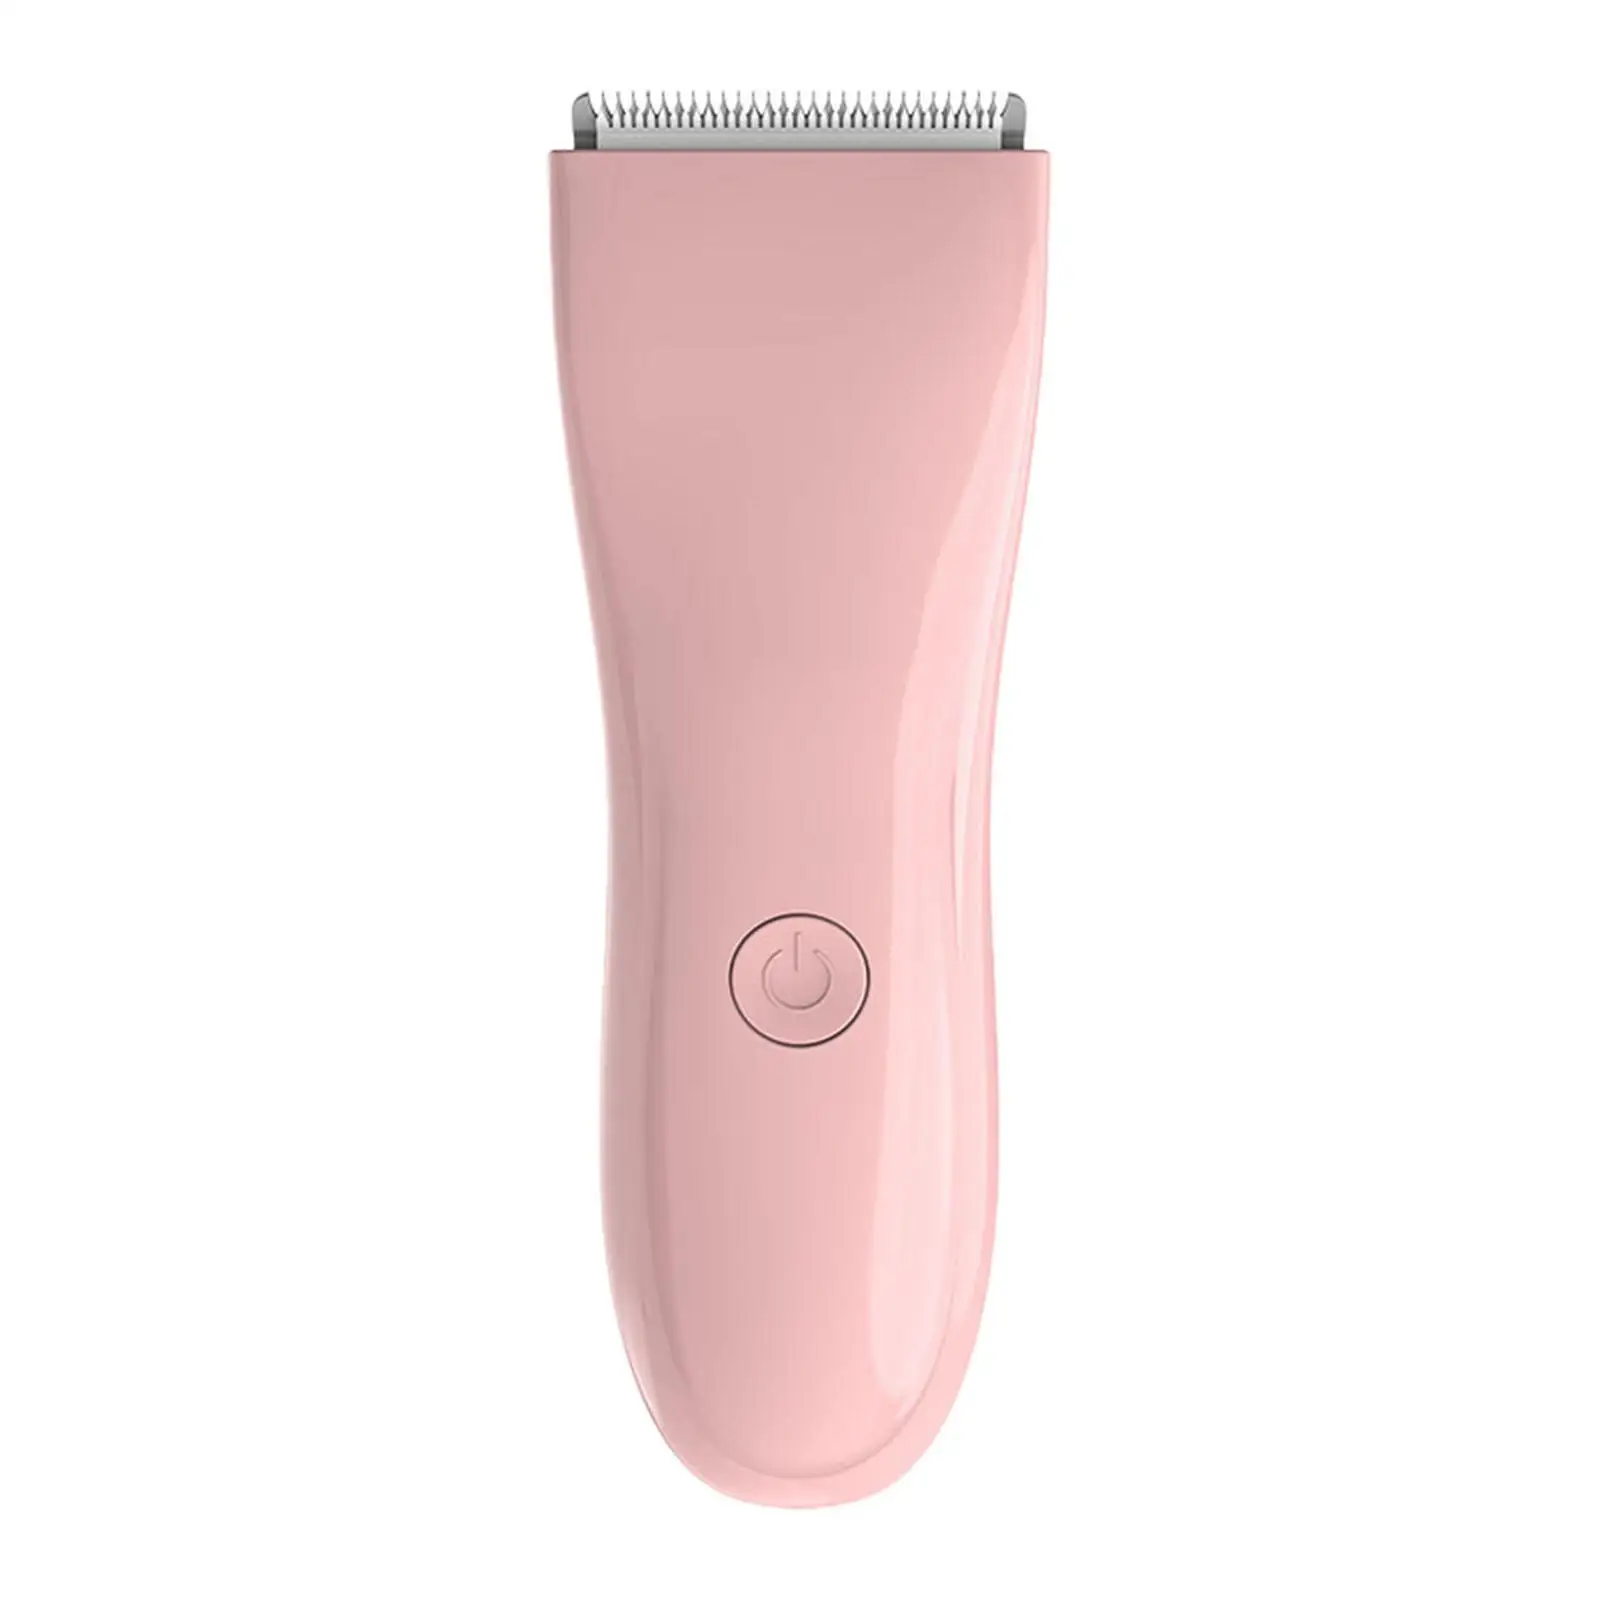 Quiet Hair Trimmer Hair Grooming Kit Rechargeable for Kids Children